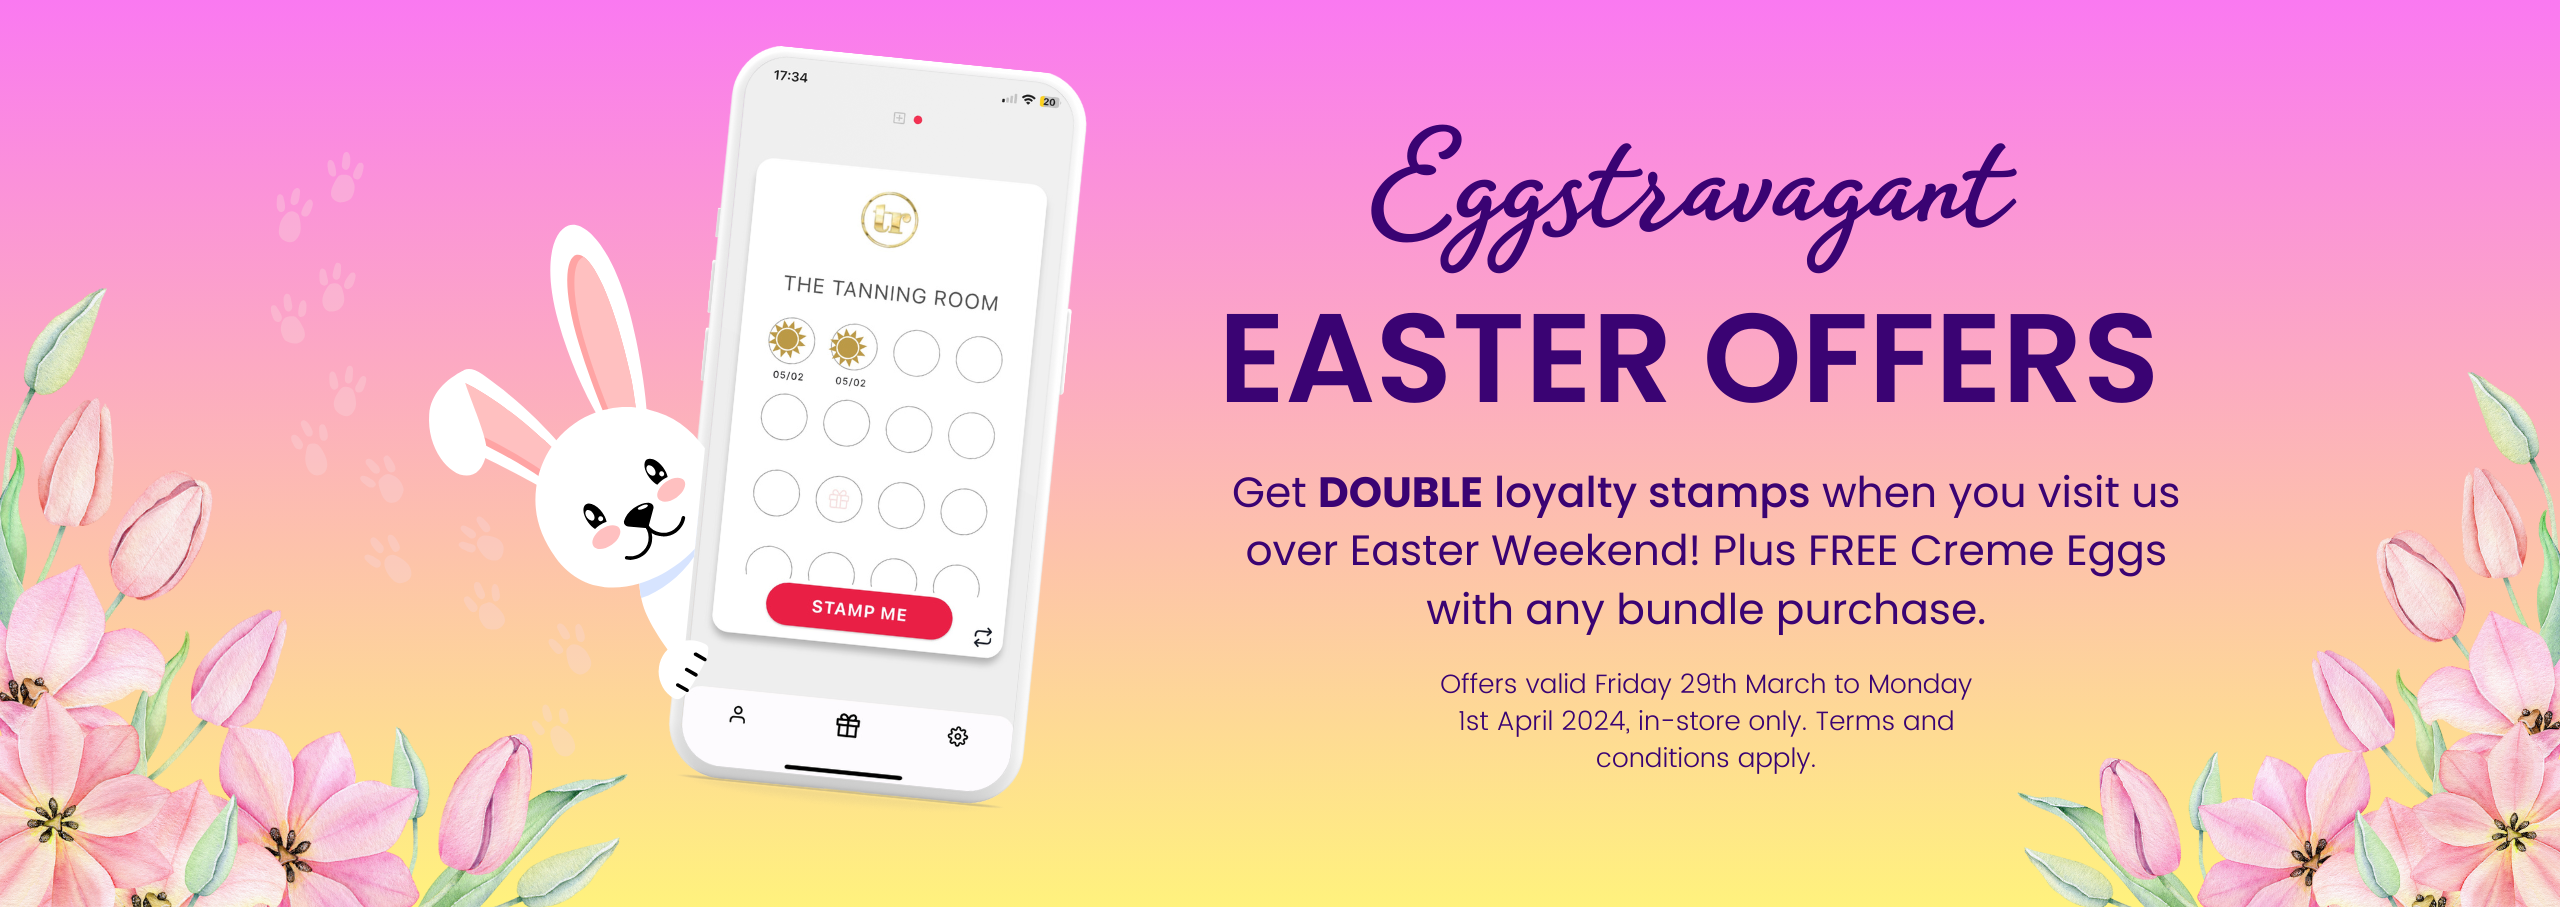 Eggstravagant Easter Offers - get DOUBLE loyalty stamps over Easter weekend